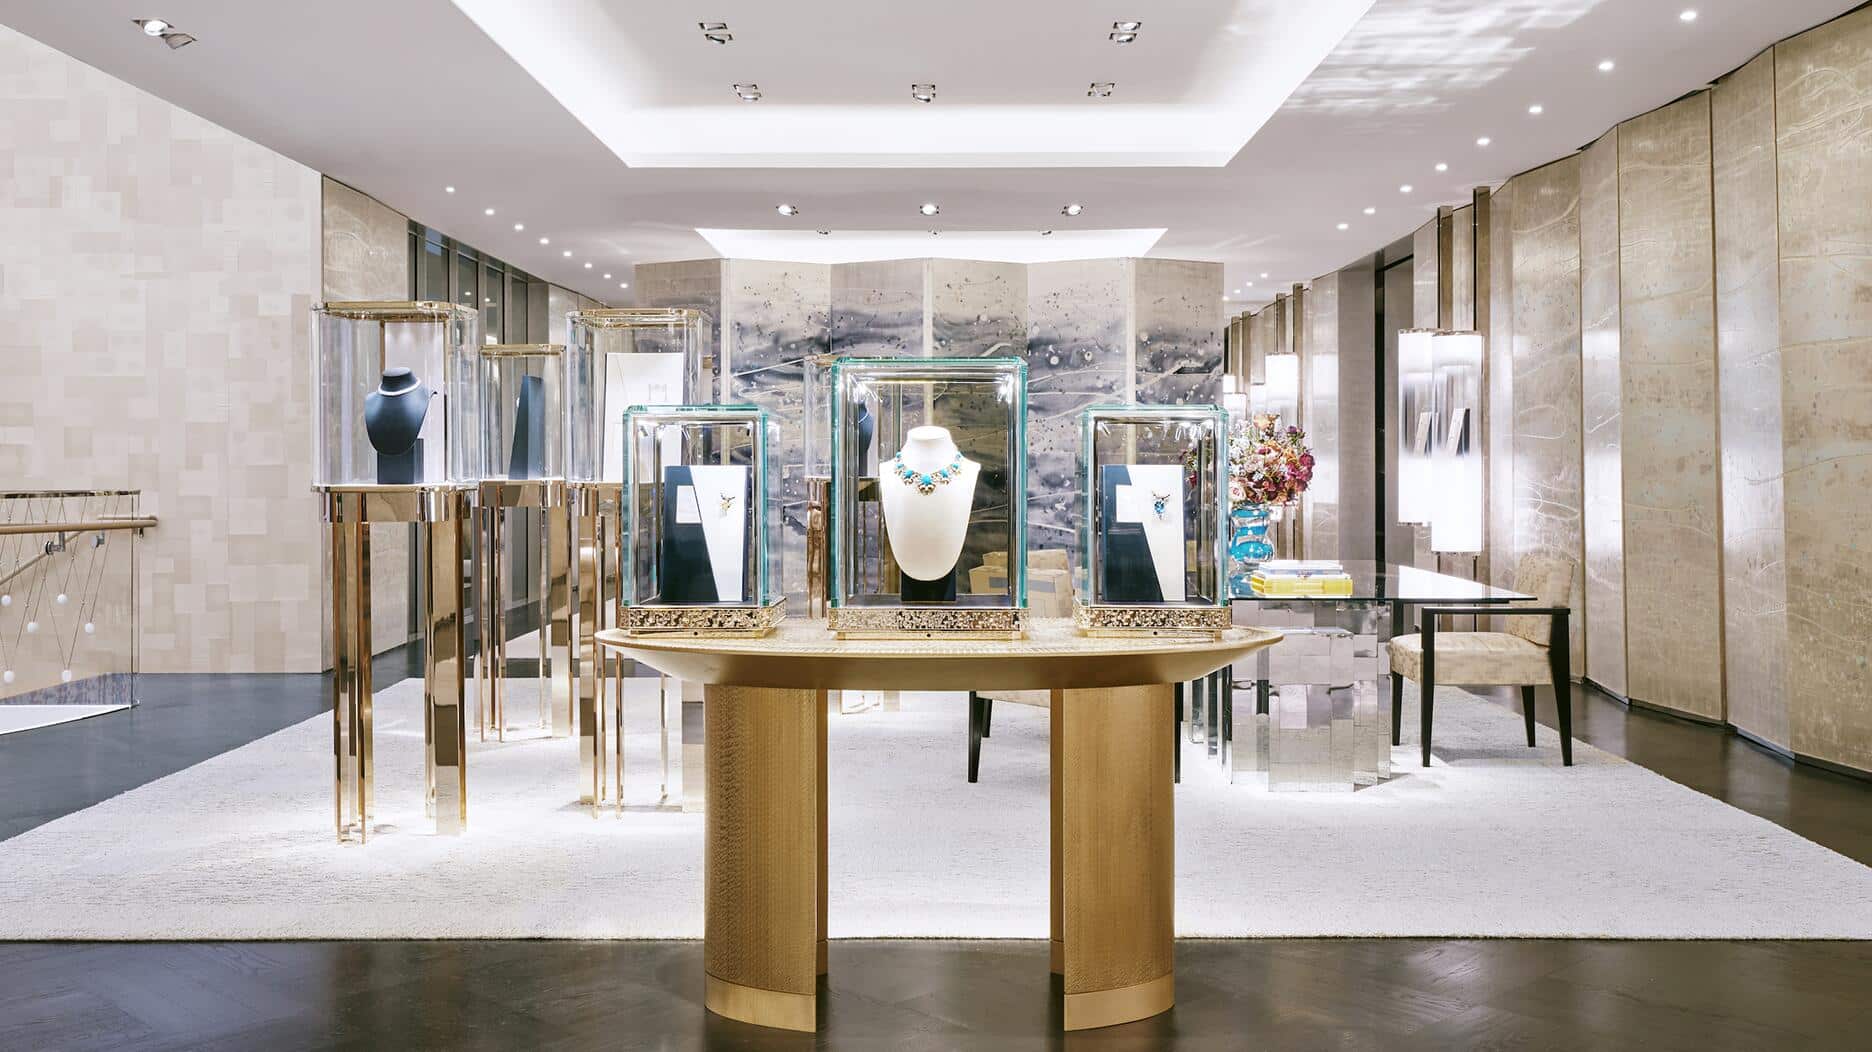 Tiffany is latest jewel for French luxury group LVMH's crown